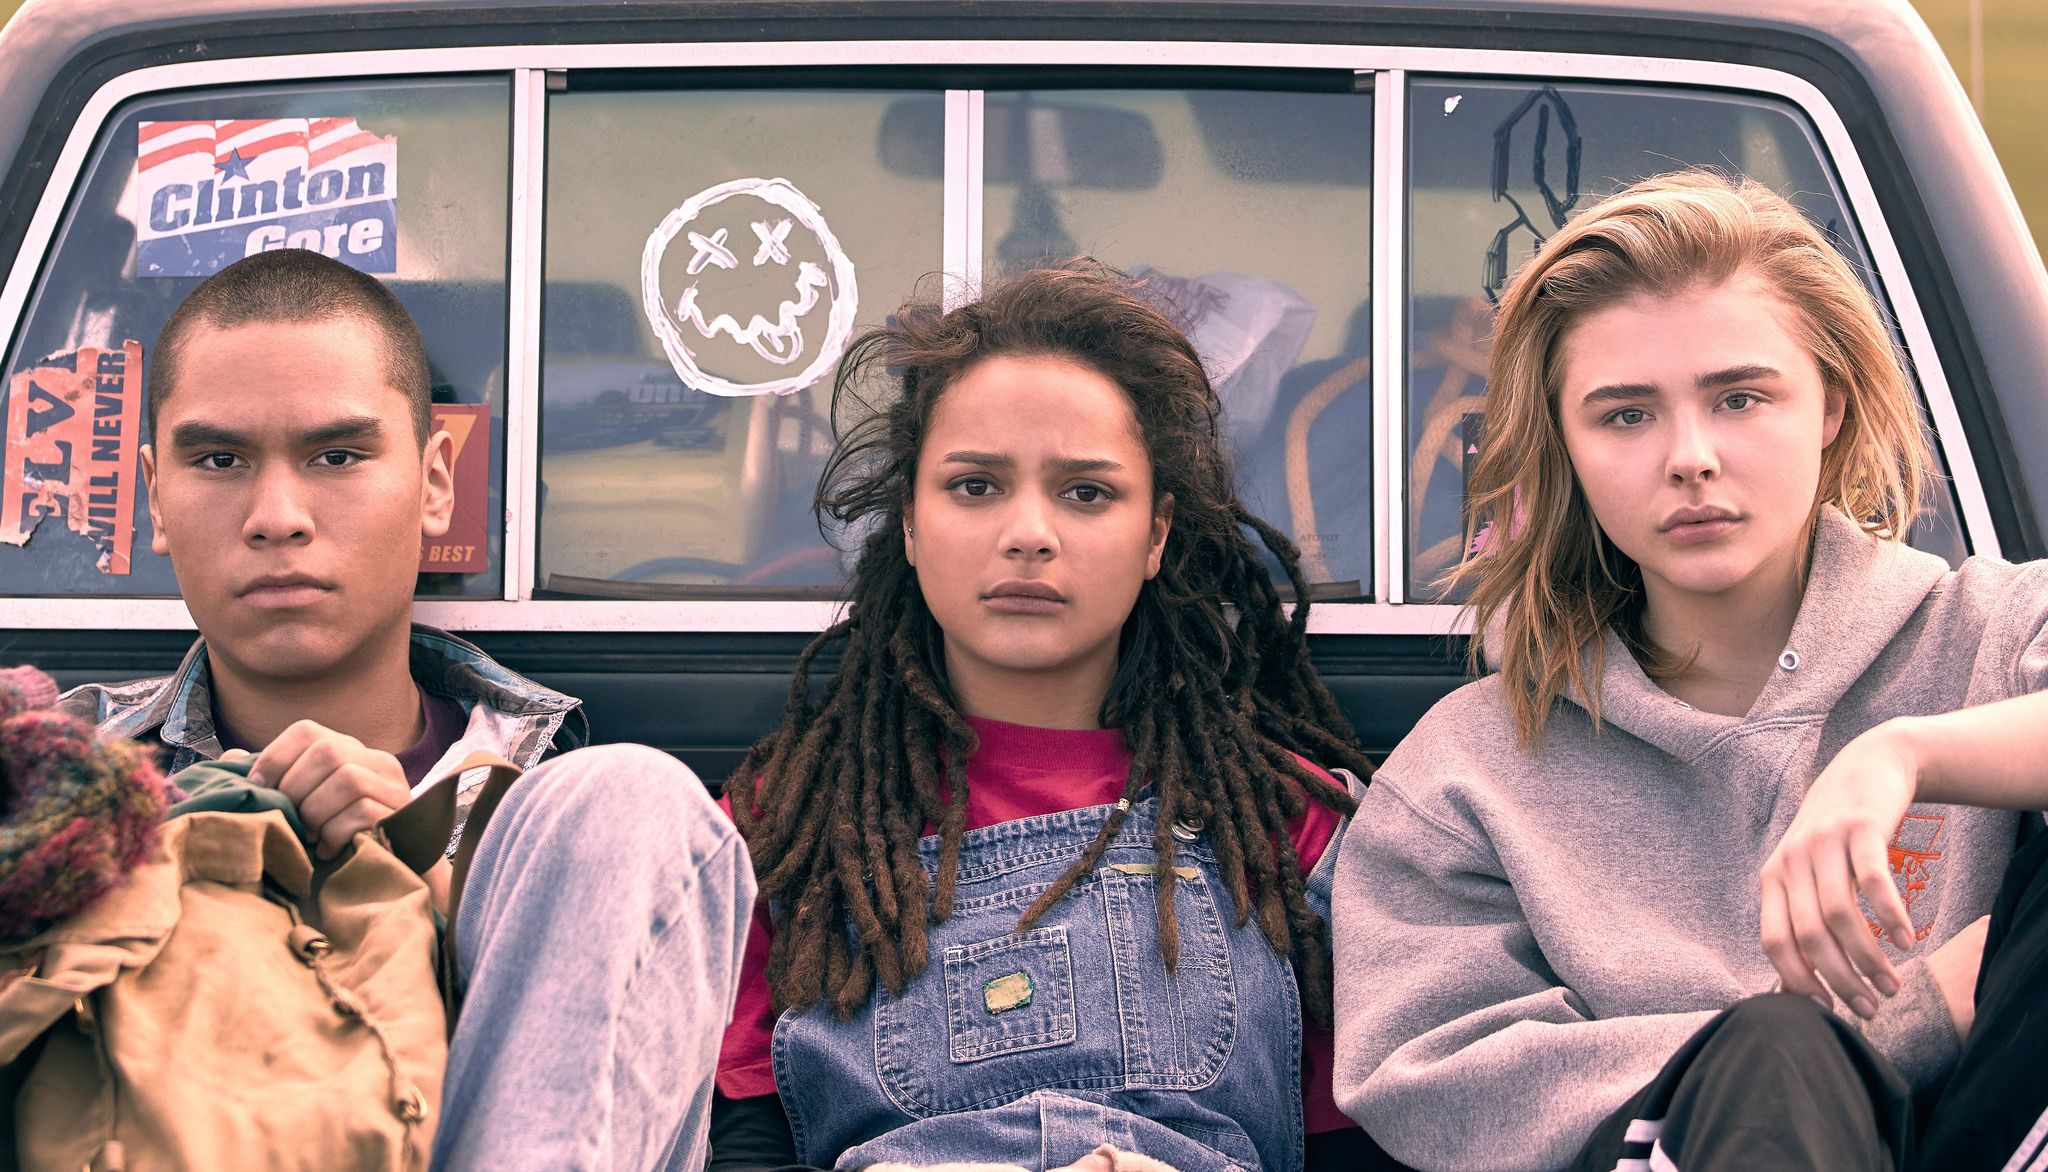 Screenshot from the upcoming film of three teens in the back of a truck; links to news story